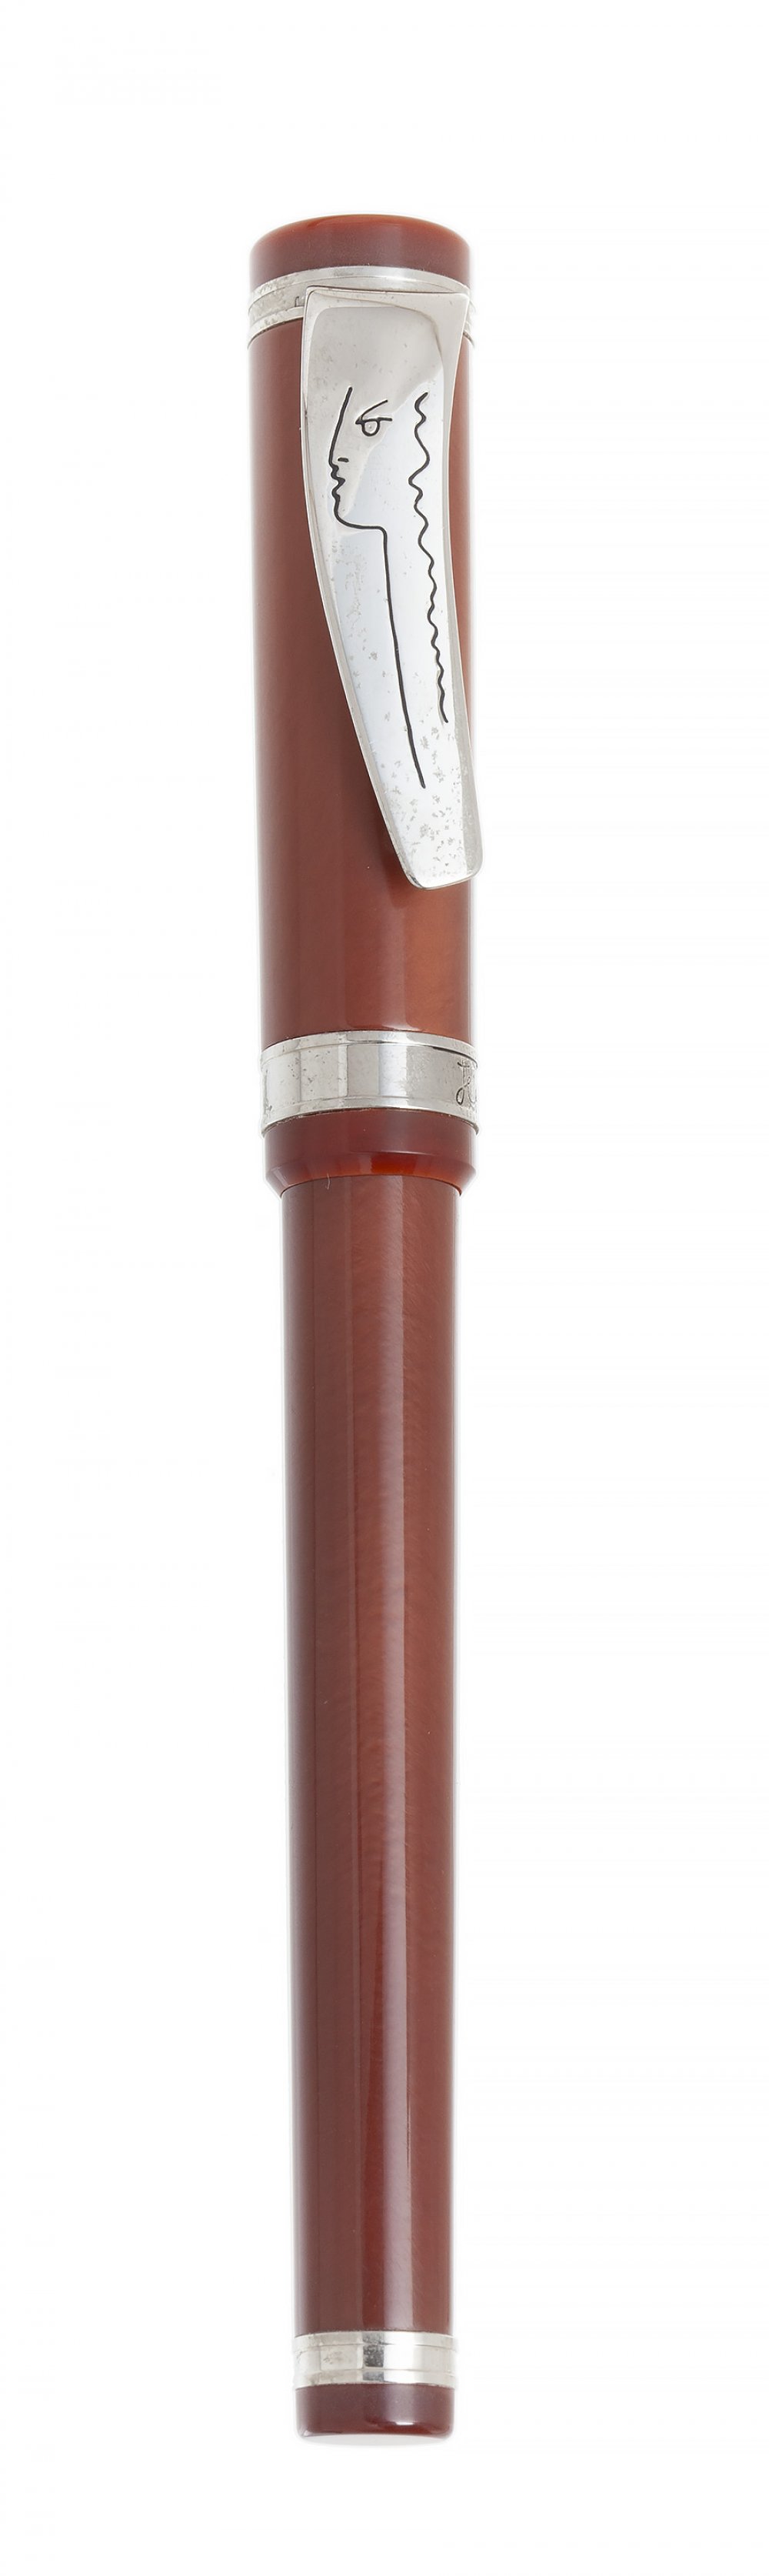 FRANCOIS-YVES LUTHIER "JEAN COCTEAU" FOUNTAIN PEN.Brown galatite barrel and silver plated